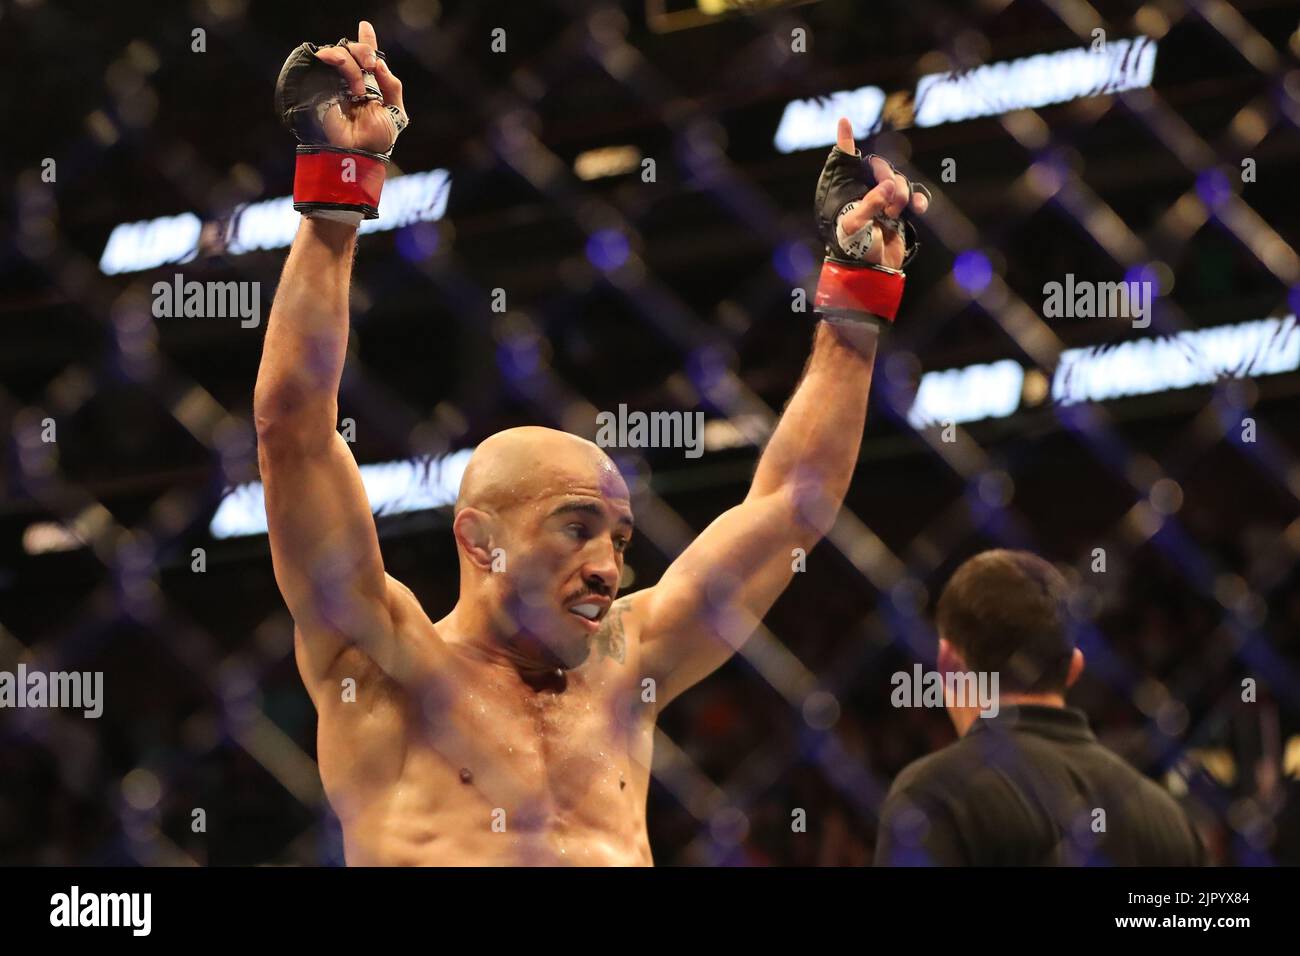 Salt Lake City, United States. 20th Aug, 2022. SALT LAKE CITY, UT - AUGUST 20: Jose Aldo raises both hands after his Bantamweight bout during the UFC 278 at the Vivint Arena on August 20, 2022 in Salt Lake City, Utah, United States. (Photo by Alejandro Salazar/PxImages) Credit: Px Images/Alamy Live News Stock Photo